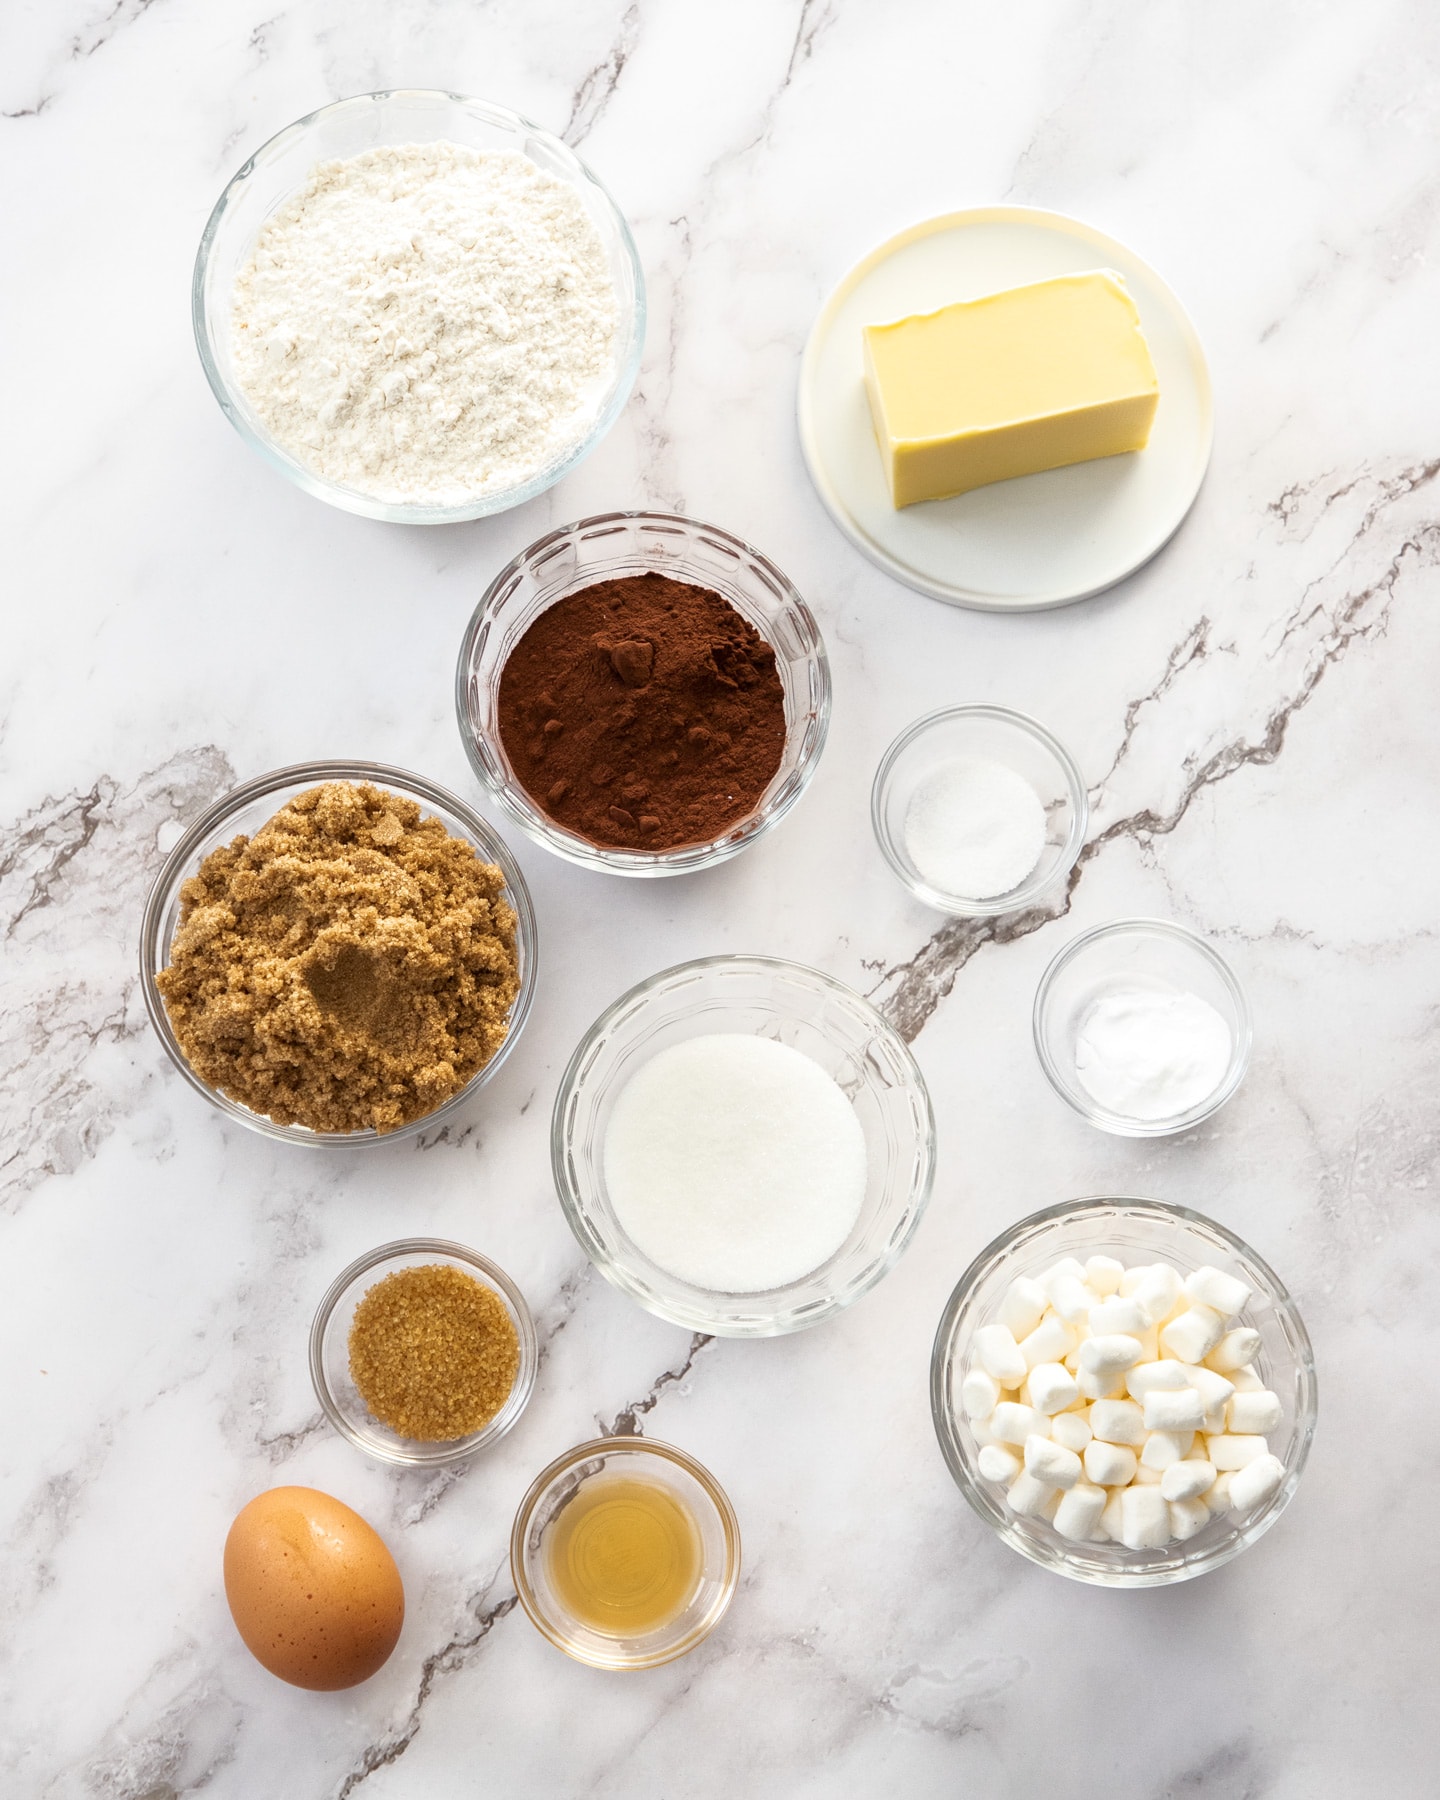 Ingredients for Chocolate Marshmallow cookies on a marble surface.